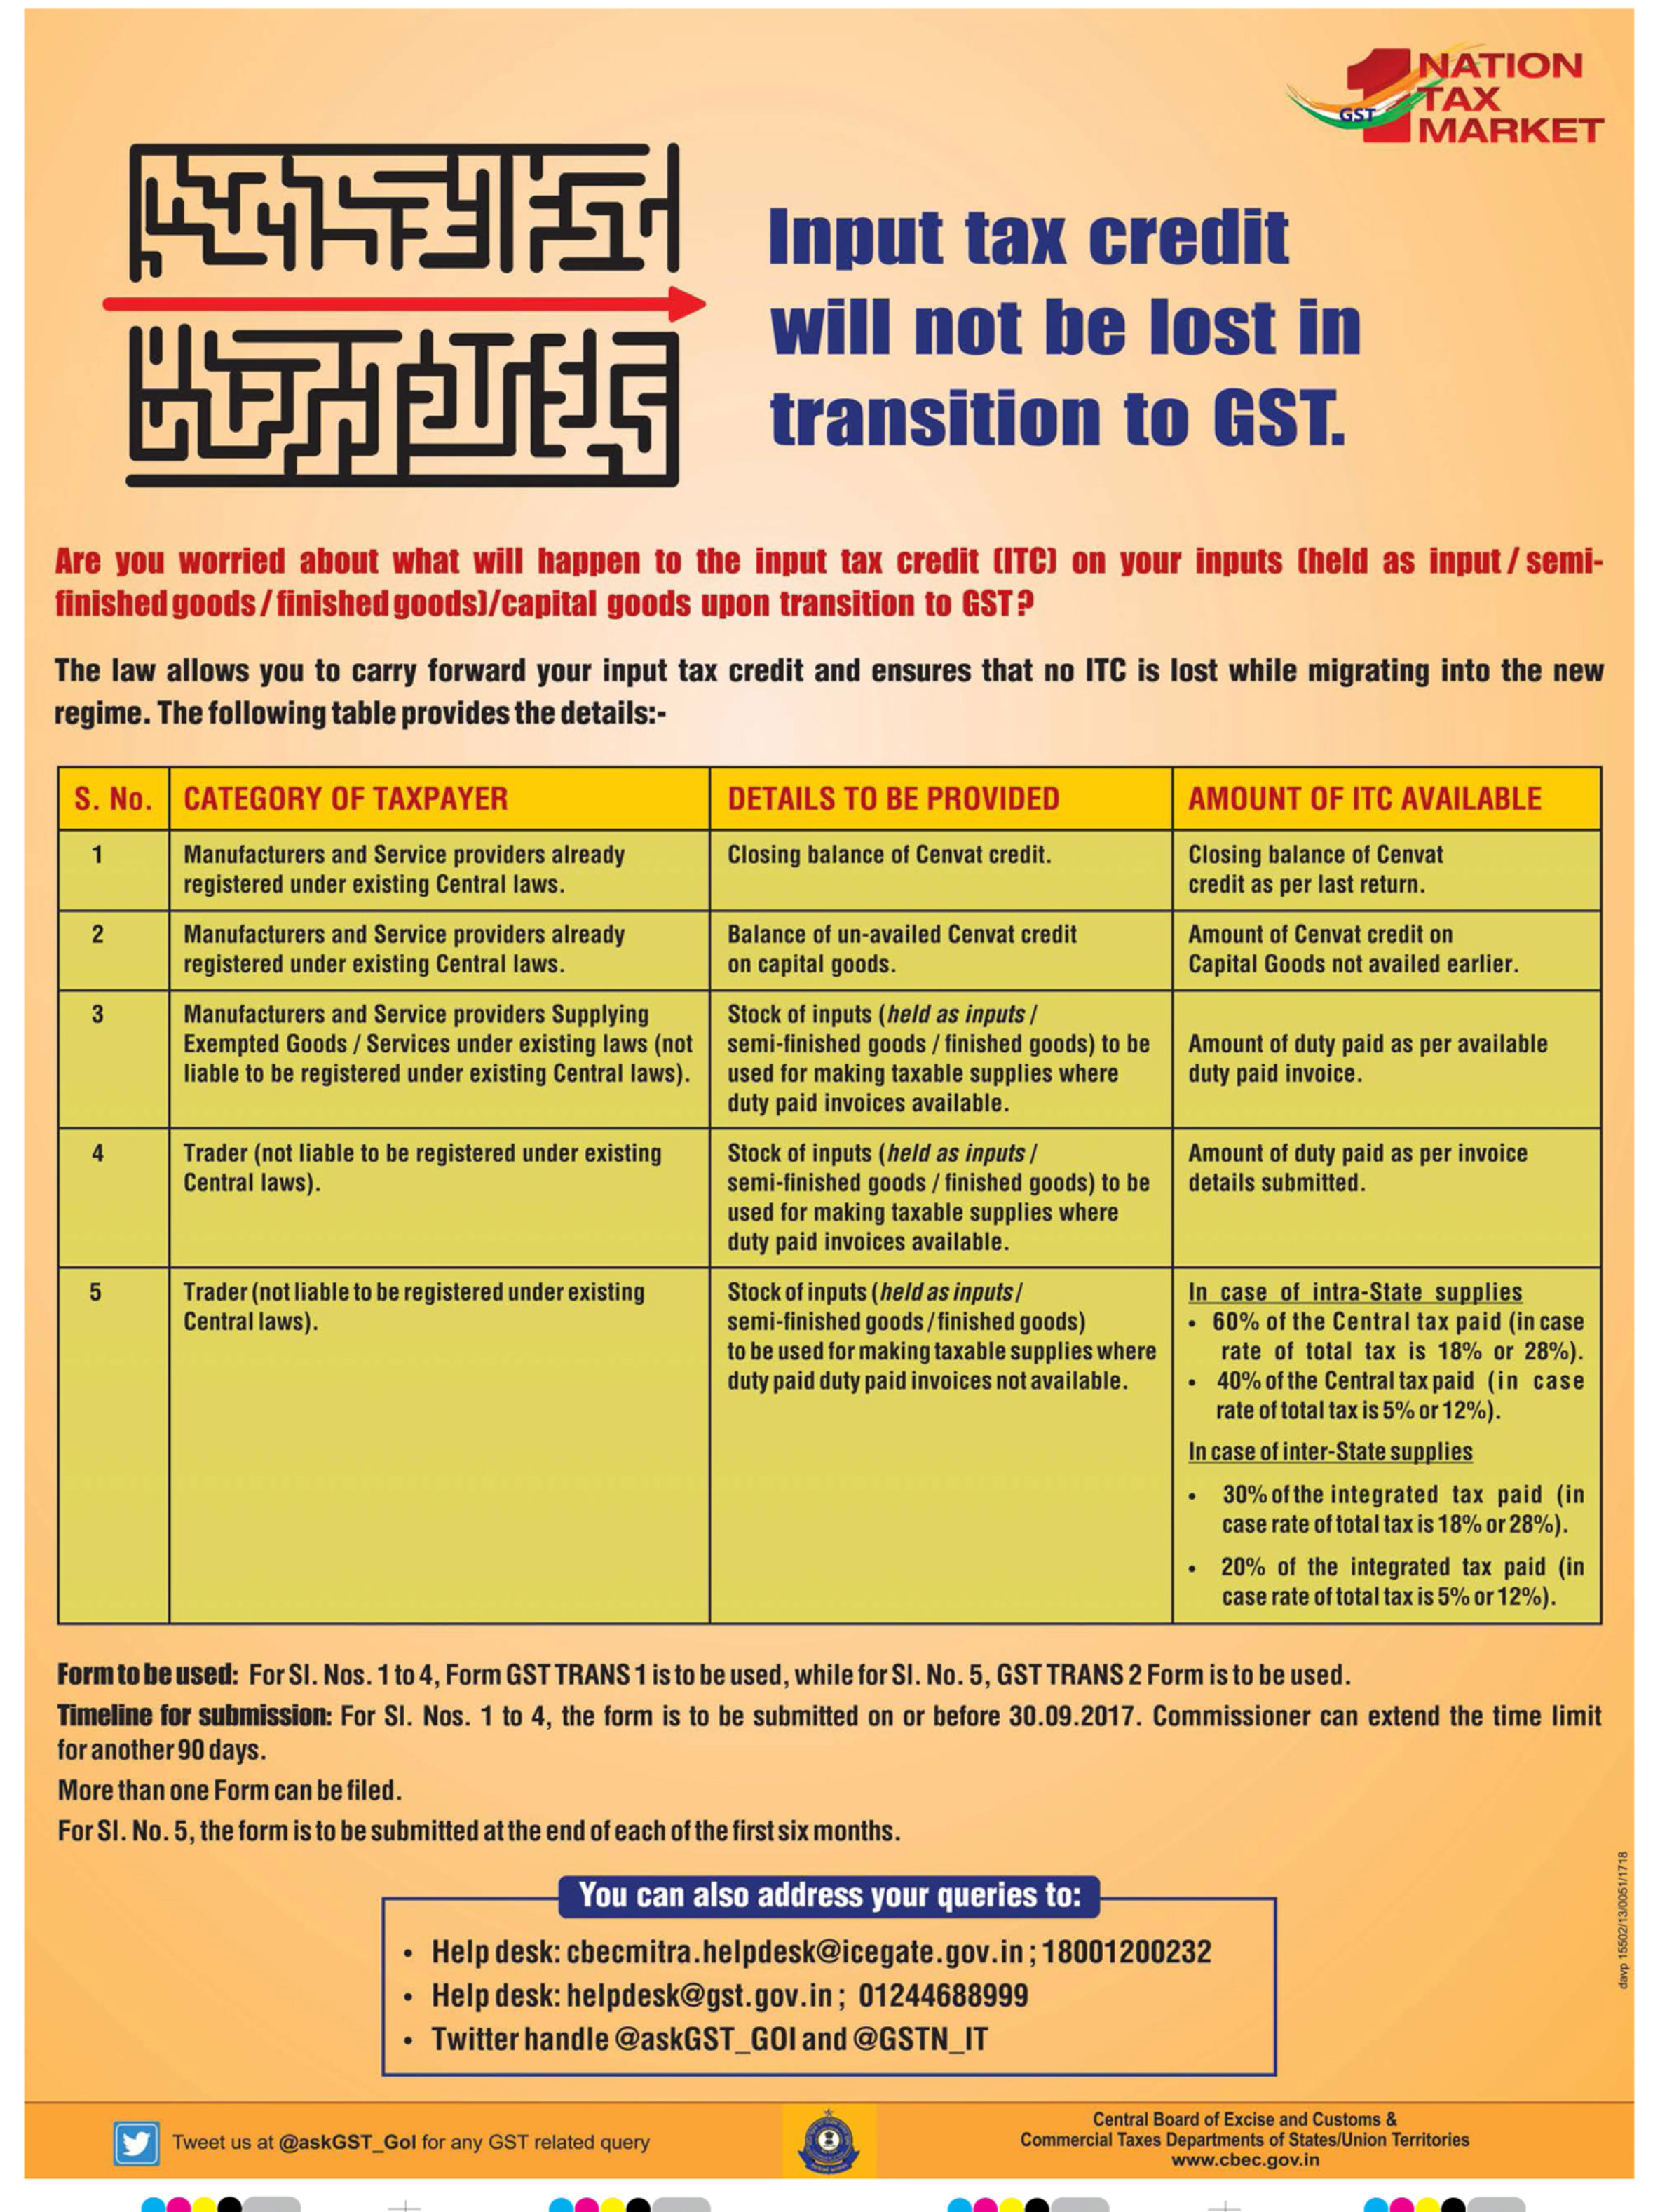 gst-input-tax-credit-will-not-be-lost-in-transition-to-gst-ad-advert